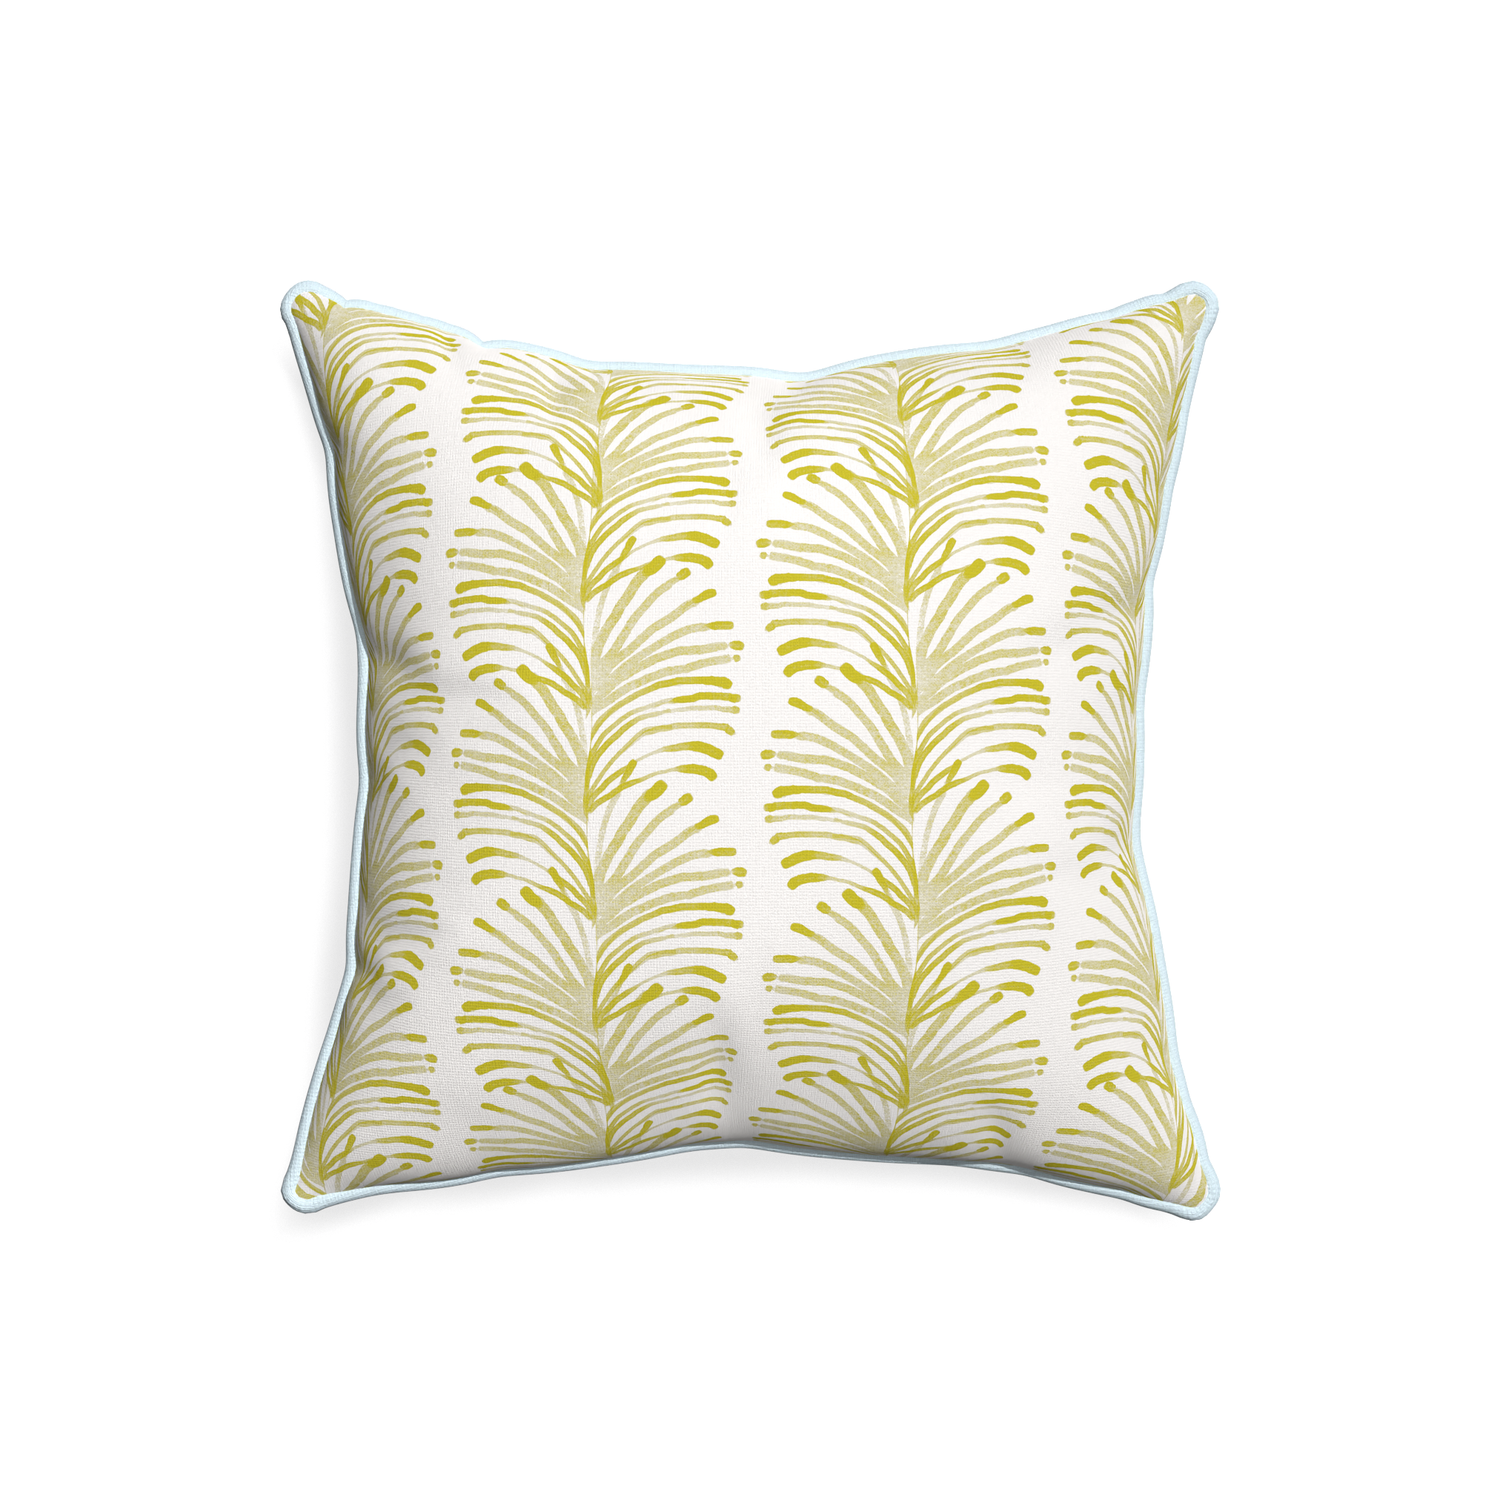 20-square emma chartreuse custom yellow stripe chartreusepillow with powder piping on white background